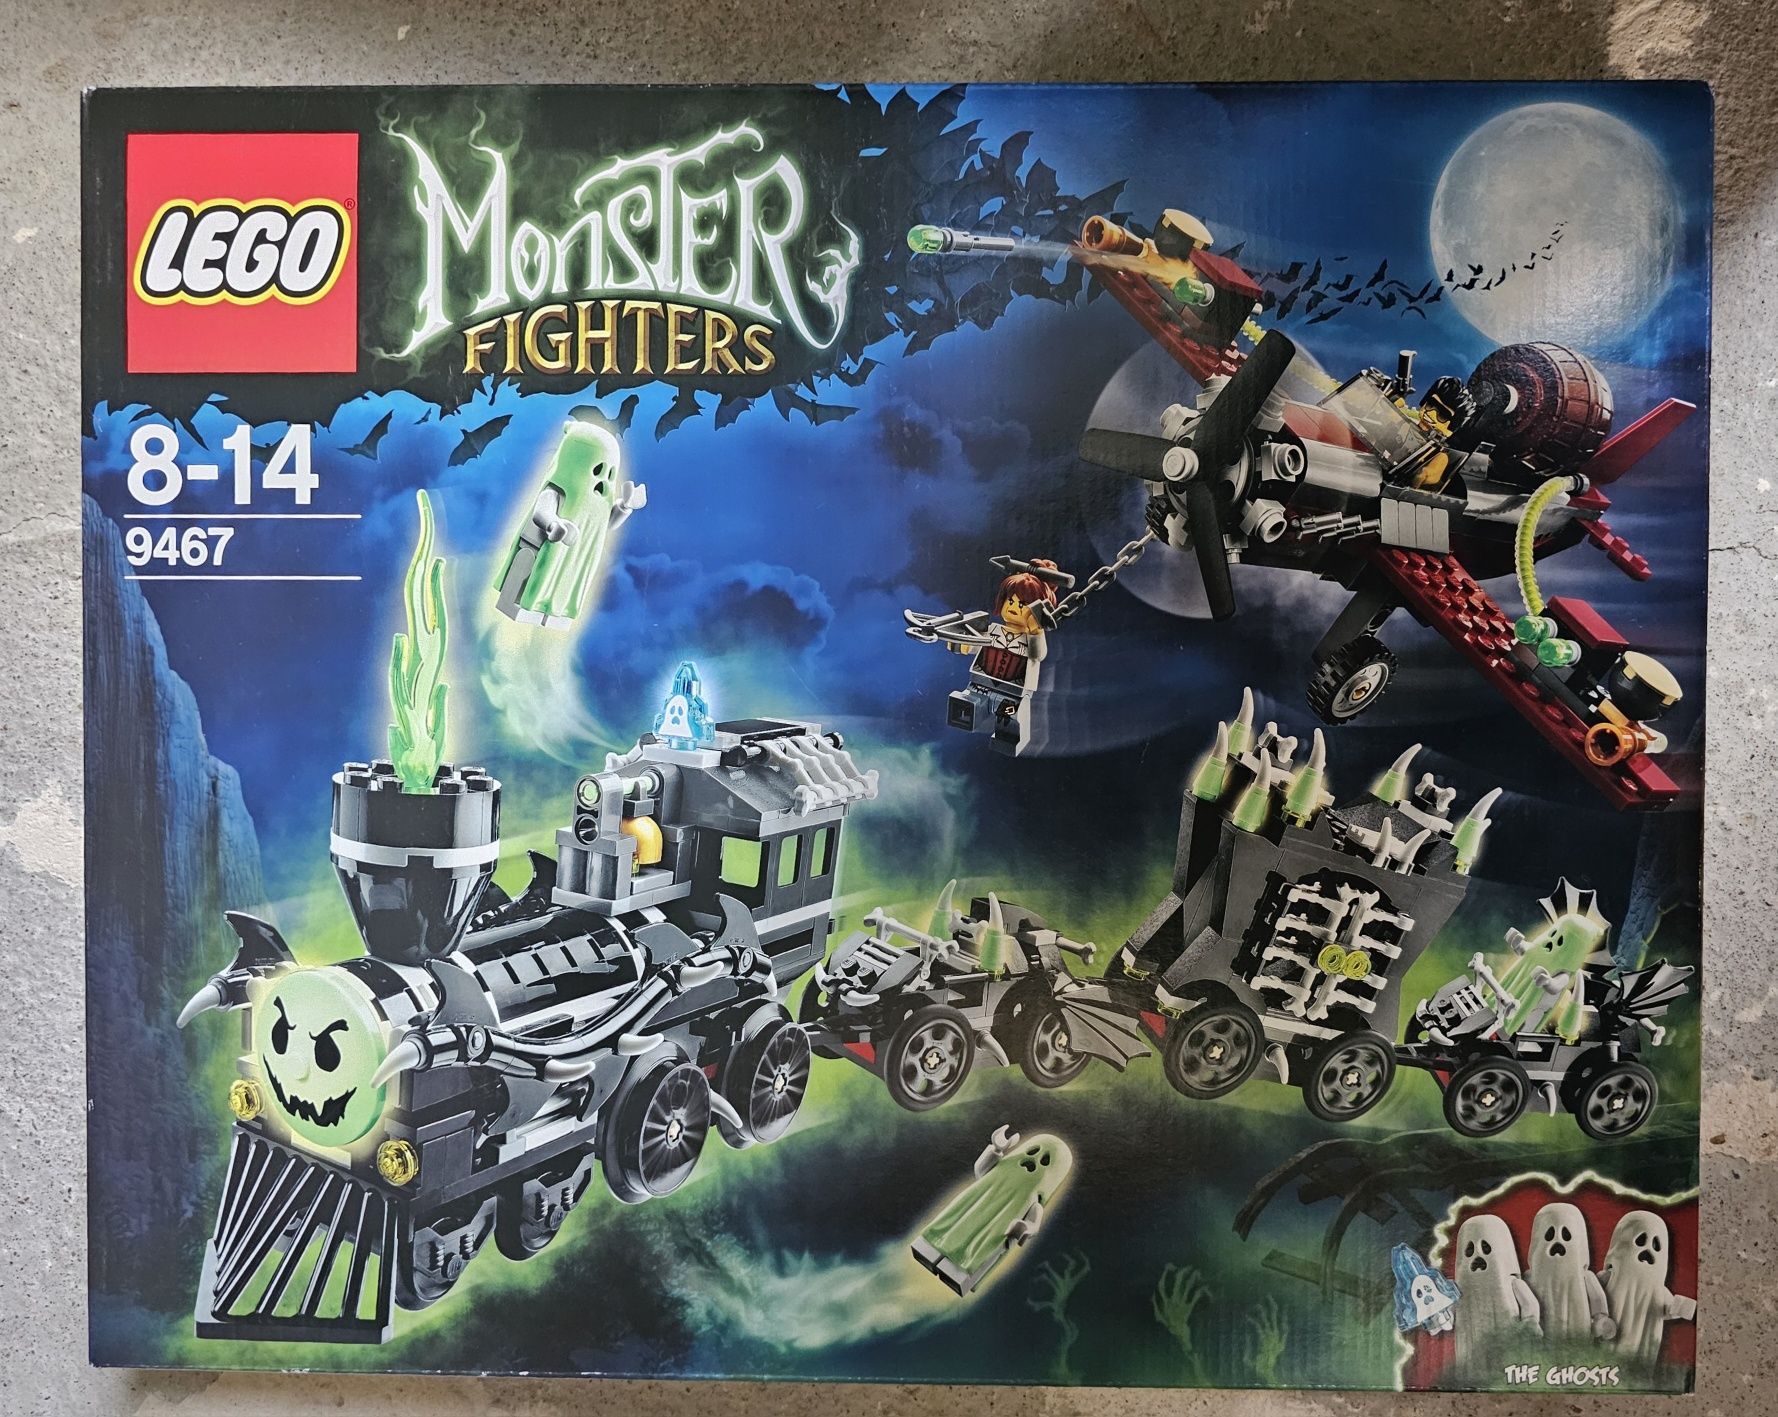 Lego 9467 Moster Fighters Pociąg widmo